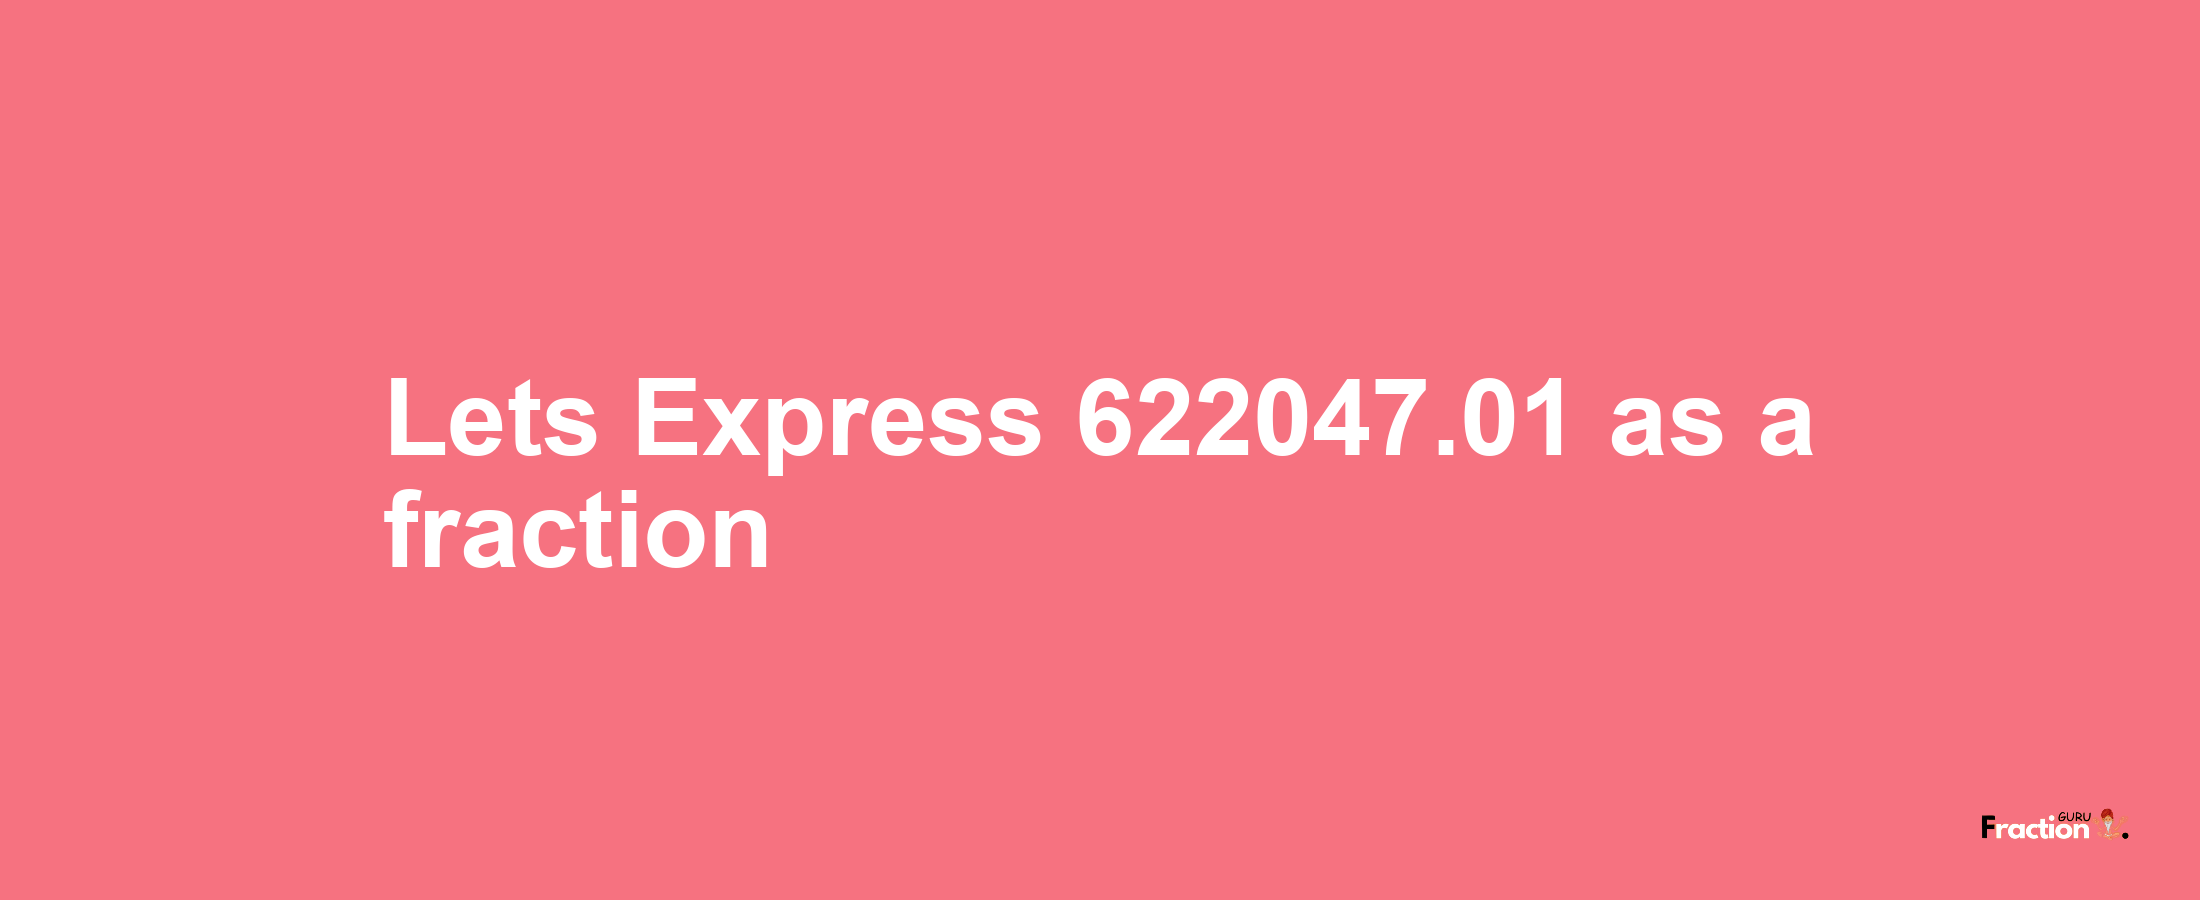 Lets Express 622047.01 as afraction